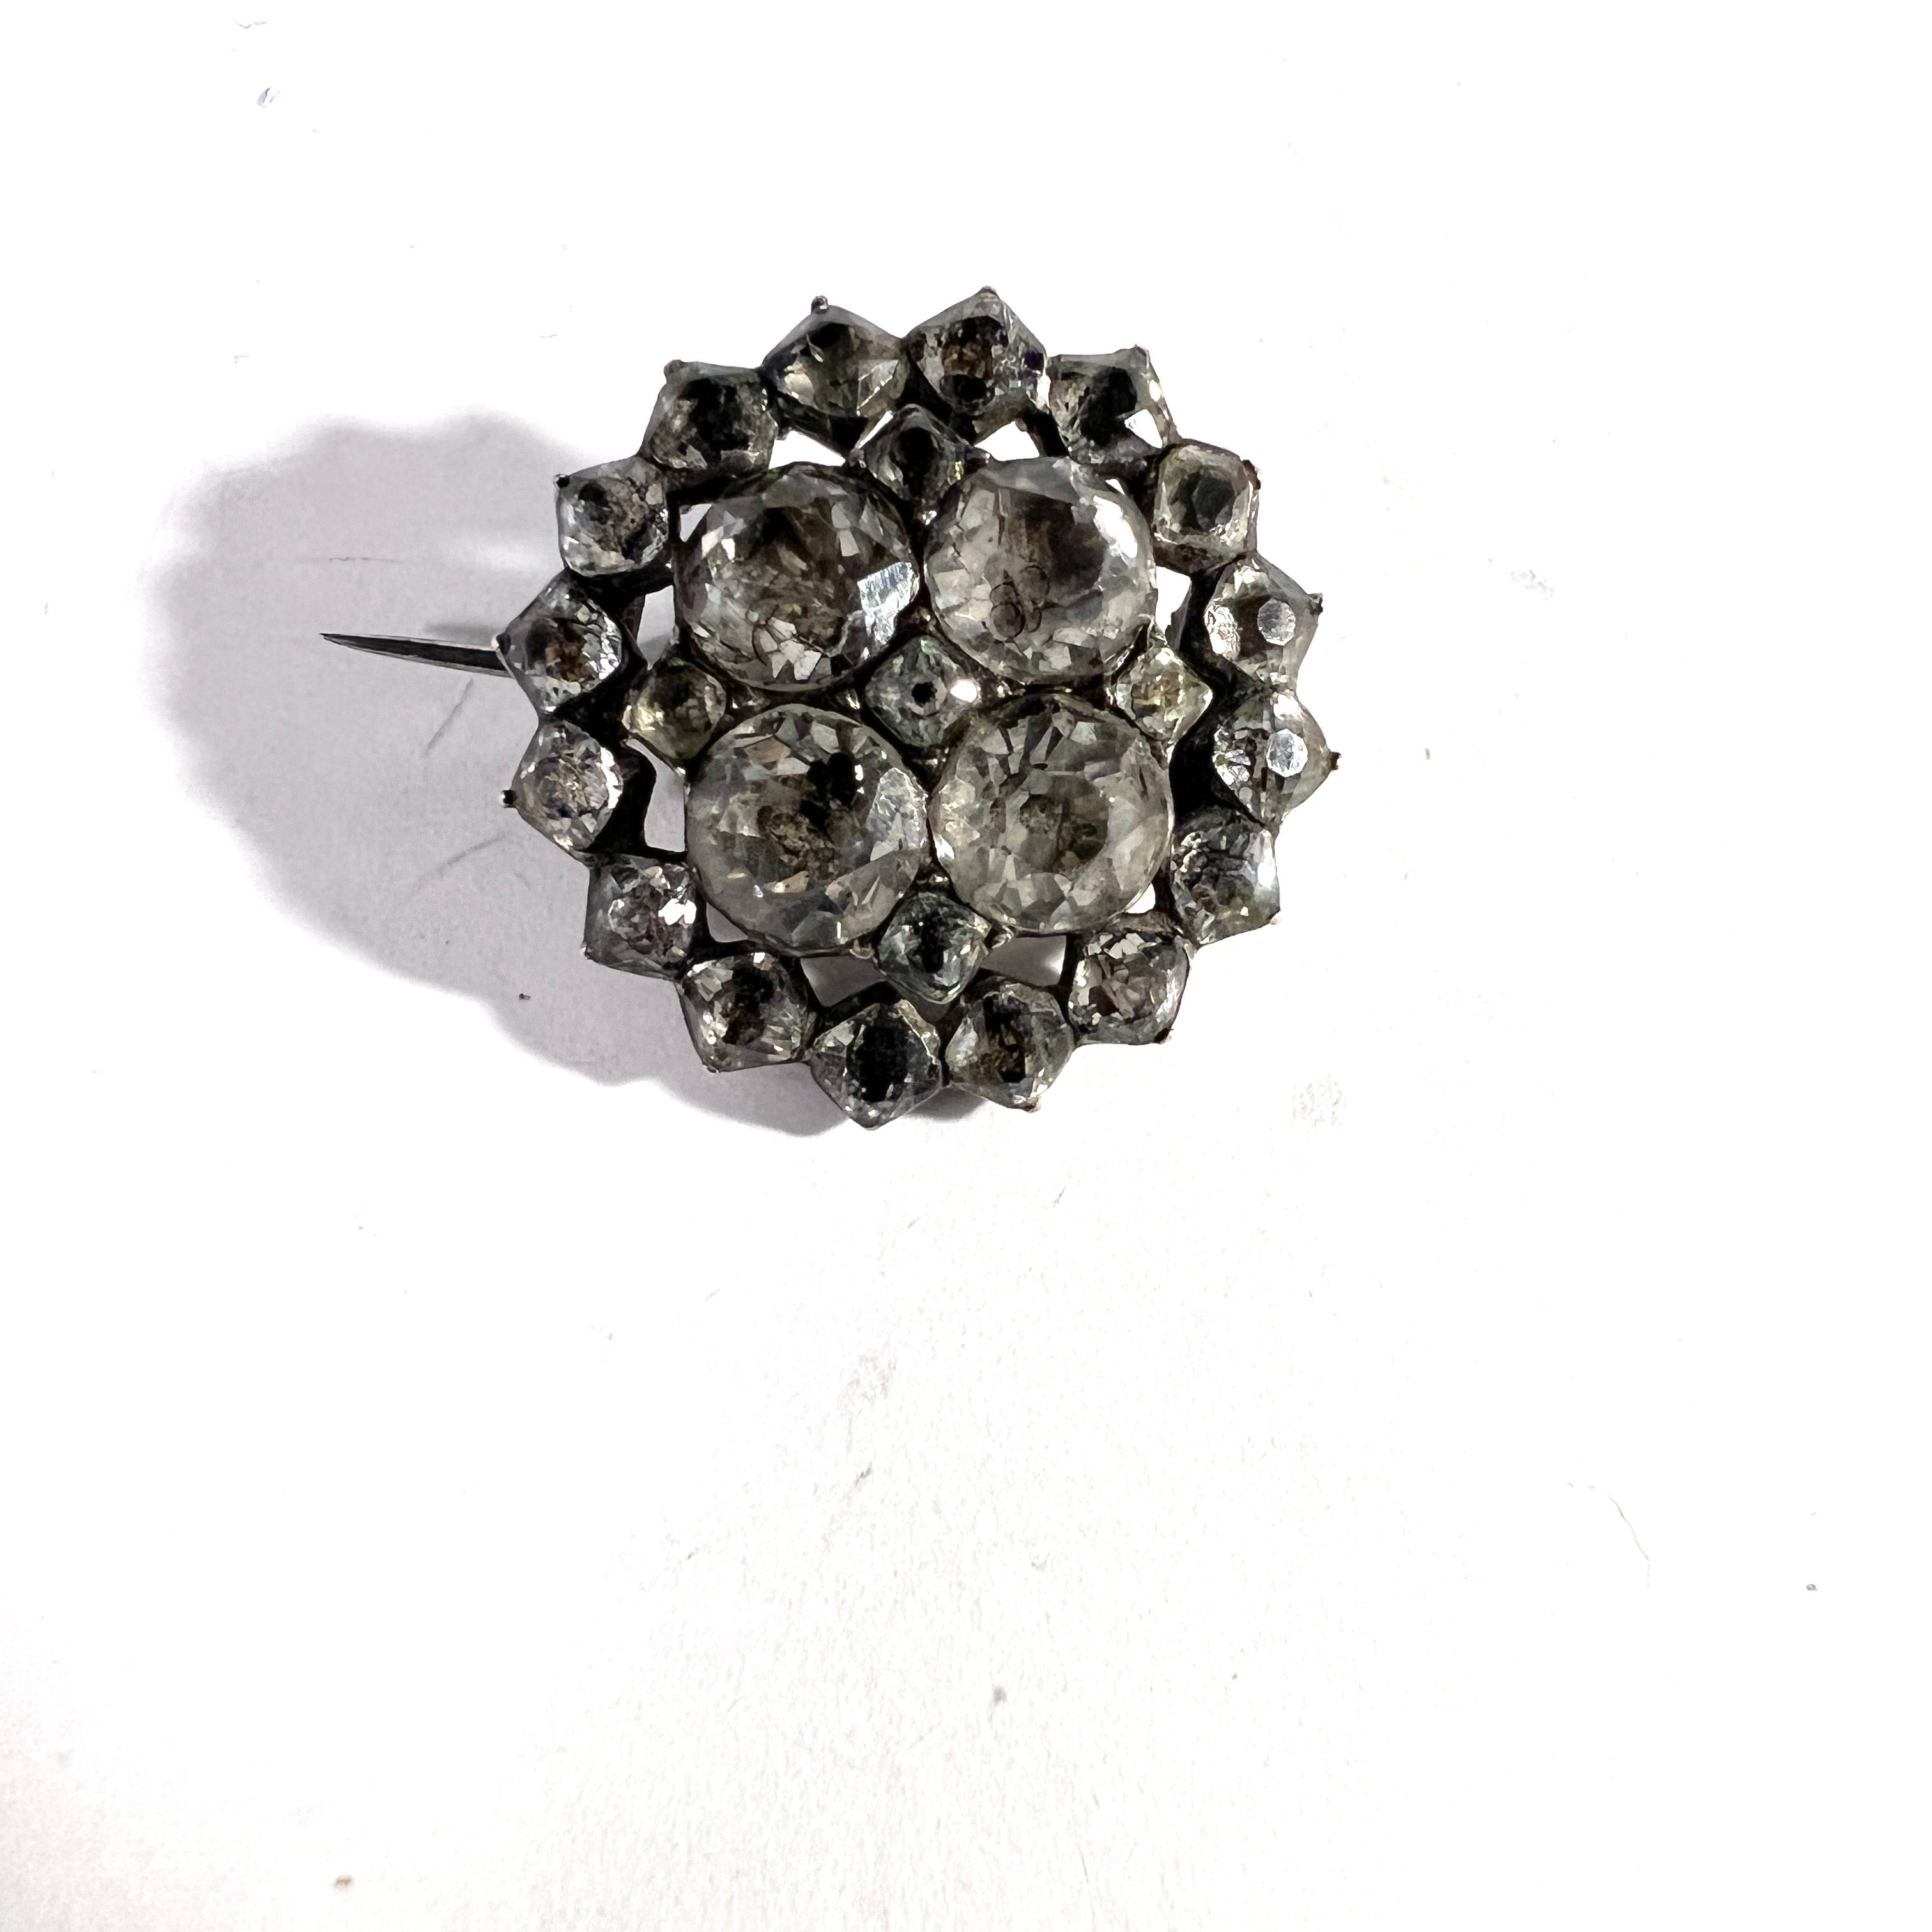 Antique Georgian early 1800s Solid Silver Black Dot Paste Brooch Pin.